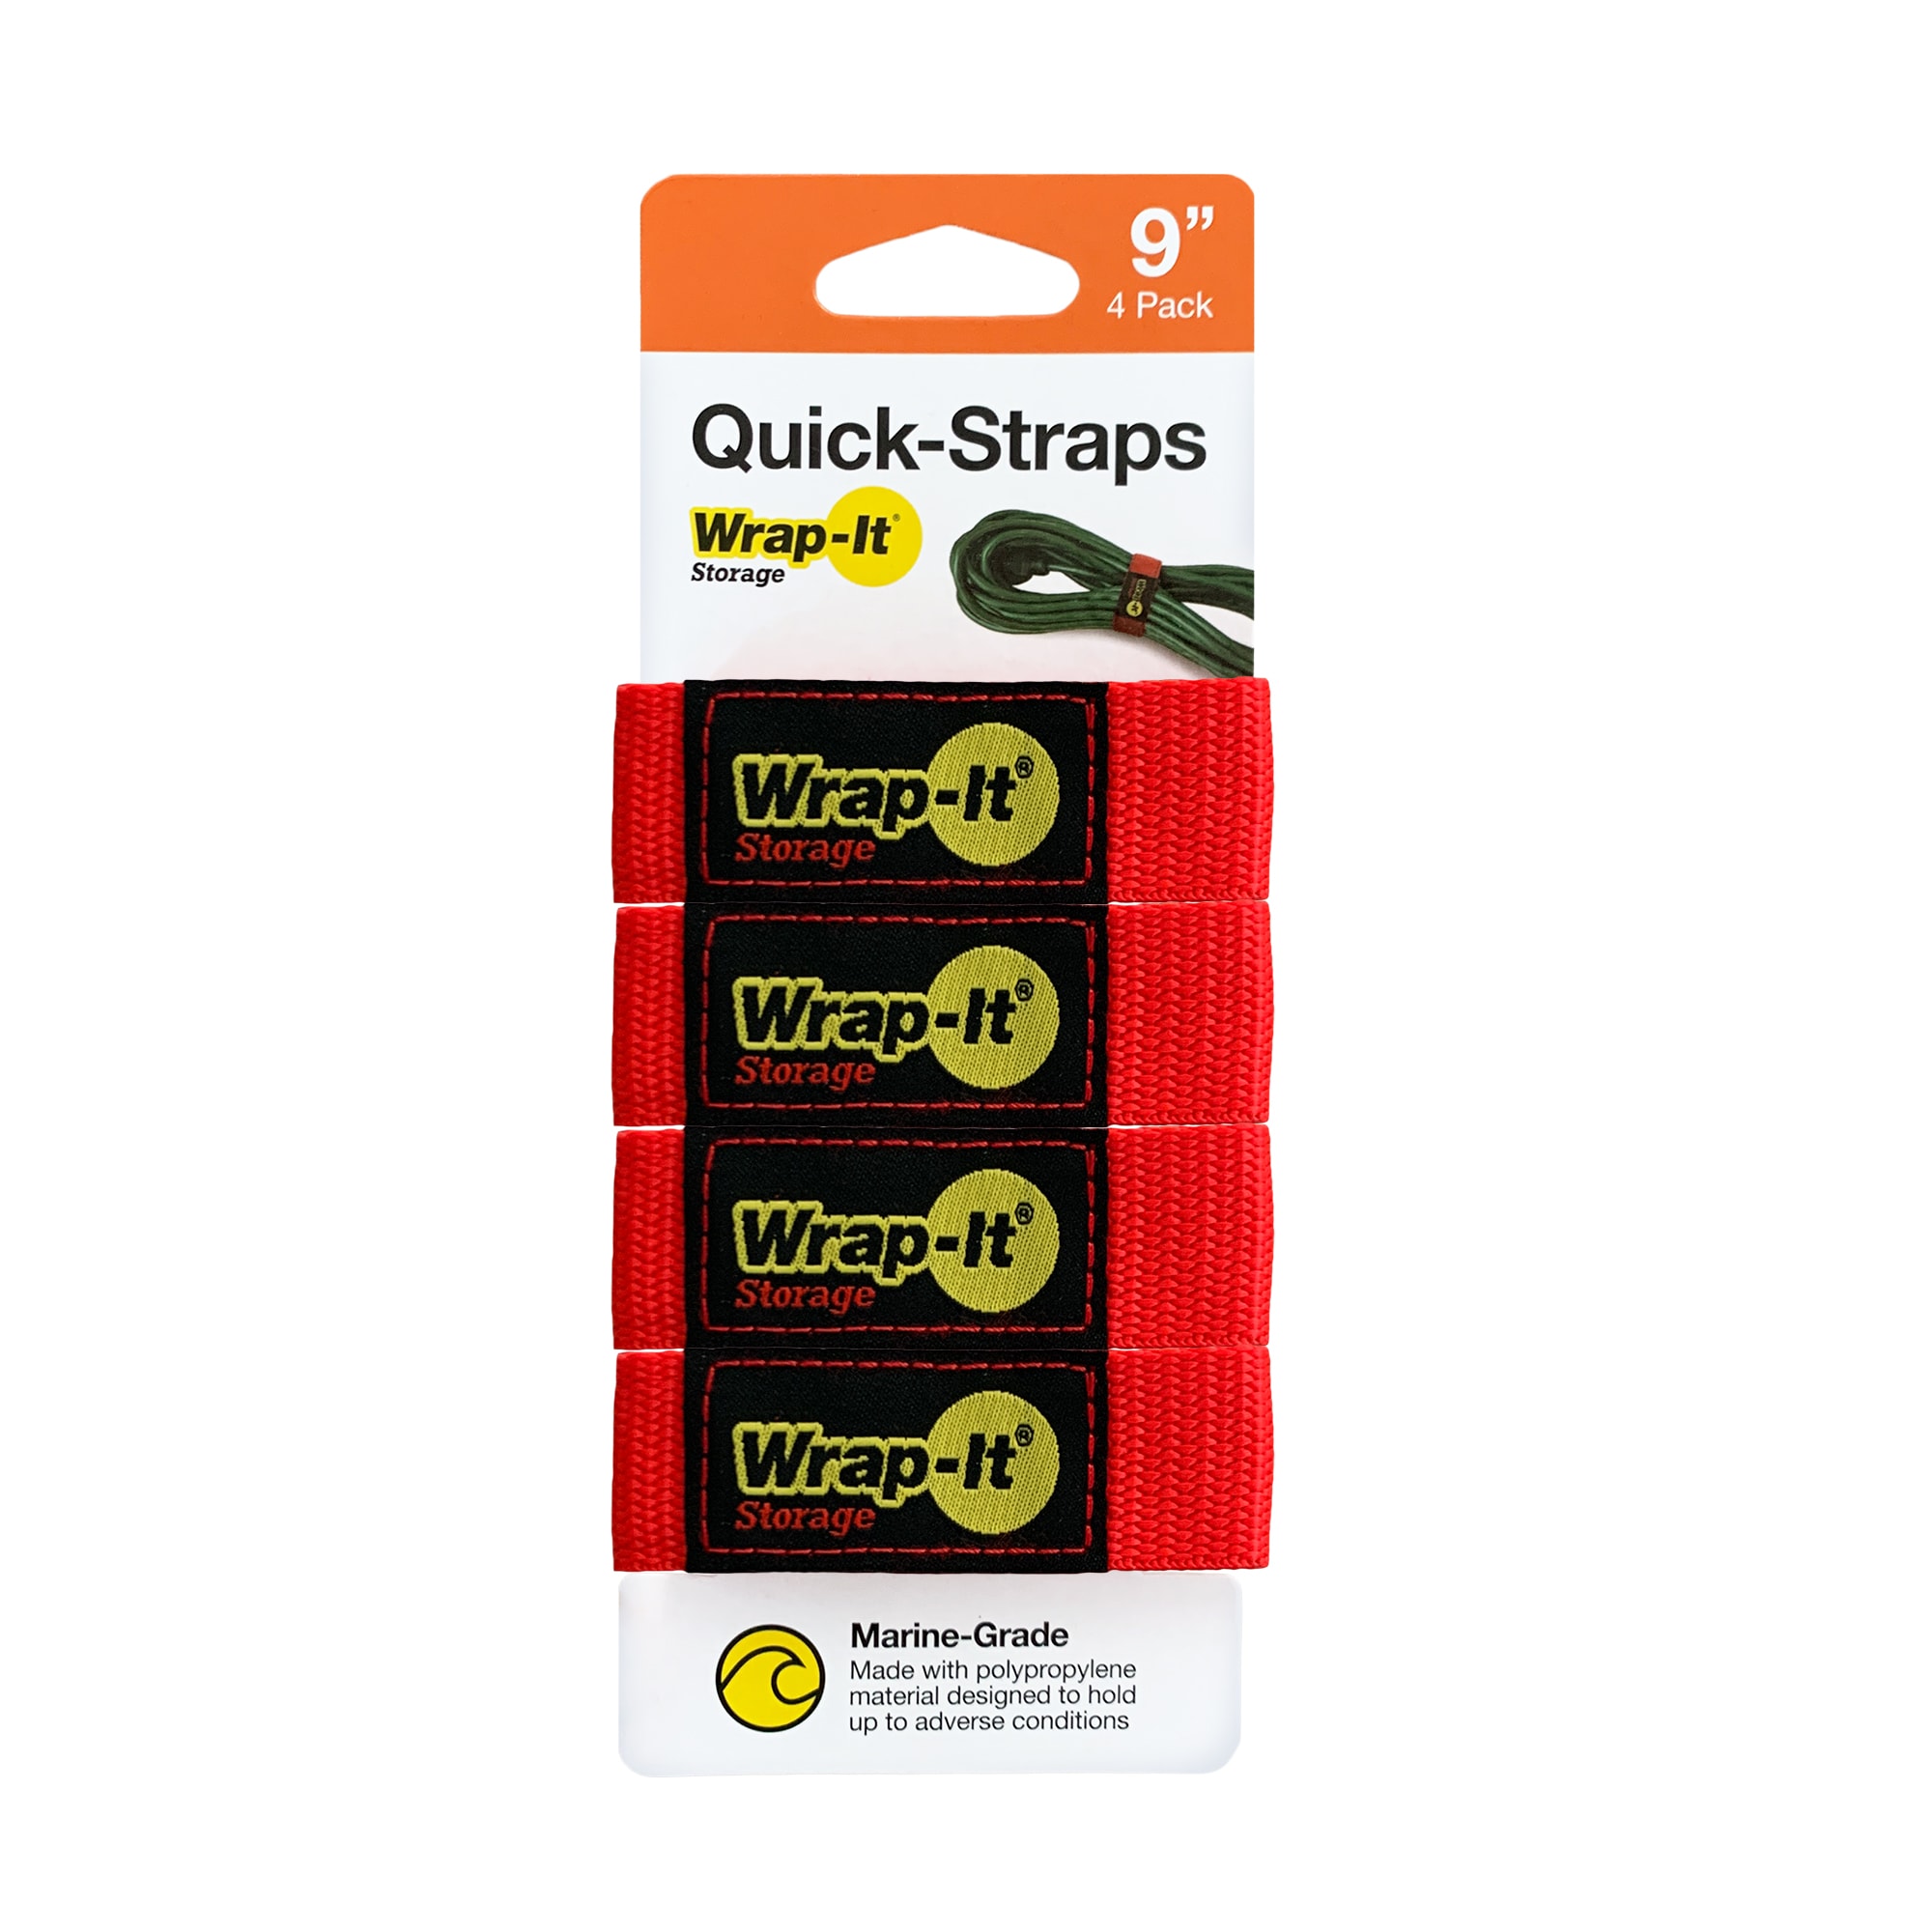 Heavy-Duty Wrap-It Storage Straps (Assorted 12 Pack) - Hook and Loop  Hanging Extension Cord Organizer for Cable Management and Storage on Garage  Wall